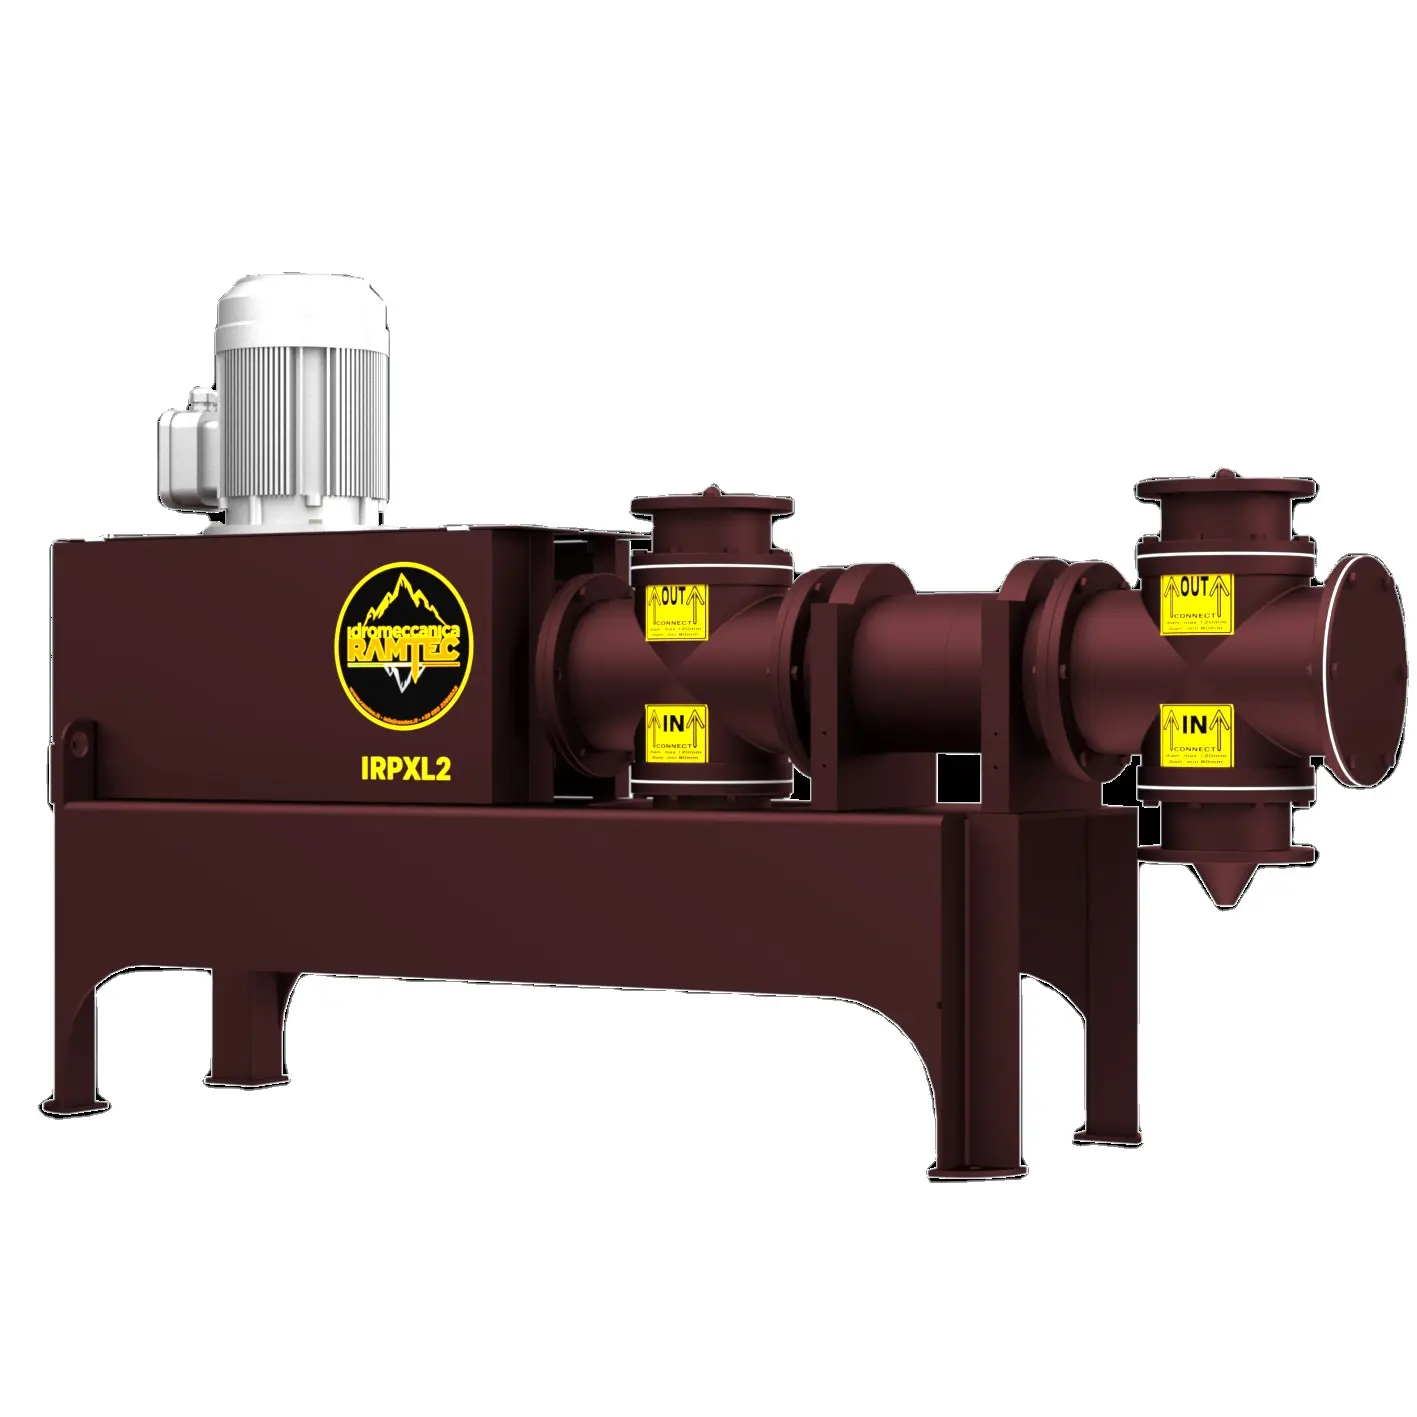 Industrial-Grade Piston Pump for Evacuating Digesters and mud moving, 7.5 kW Power, 8-inch Outlet Size